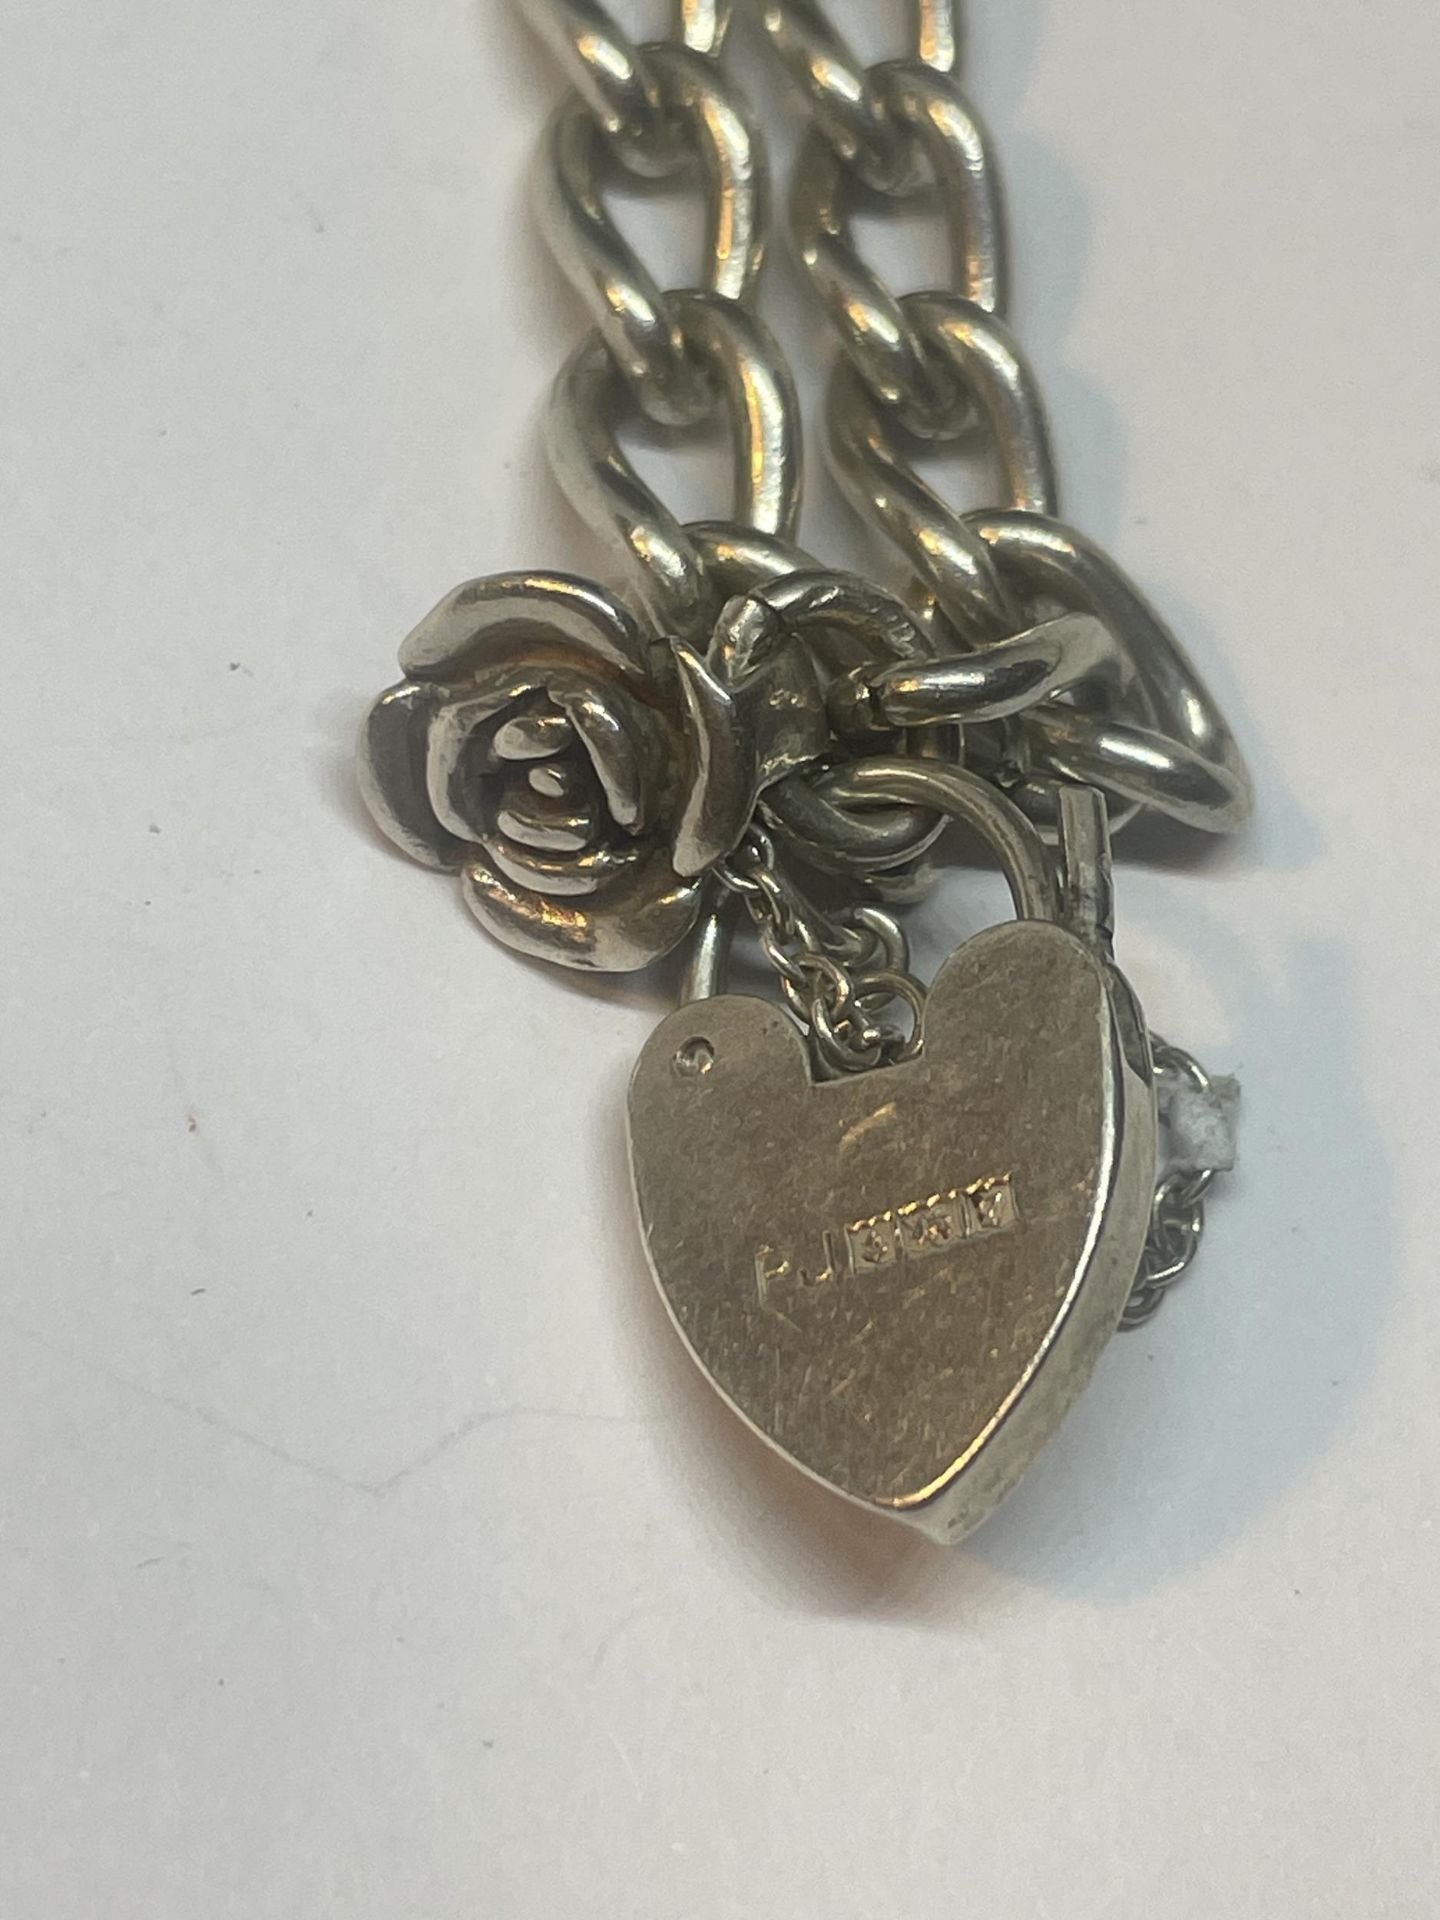 A SILVER WRIST CHAIN WITH ROSE CHARM WITH SILVER HEART PADLOCK - Image 2 of 3